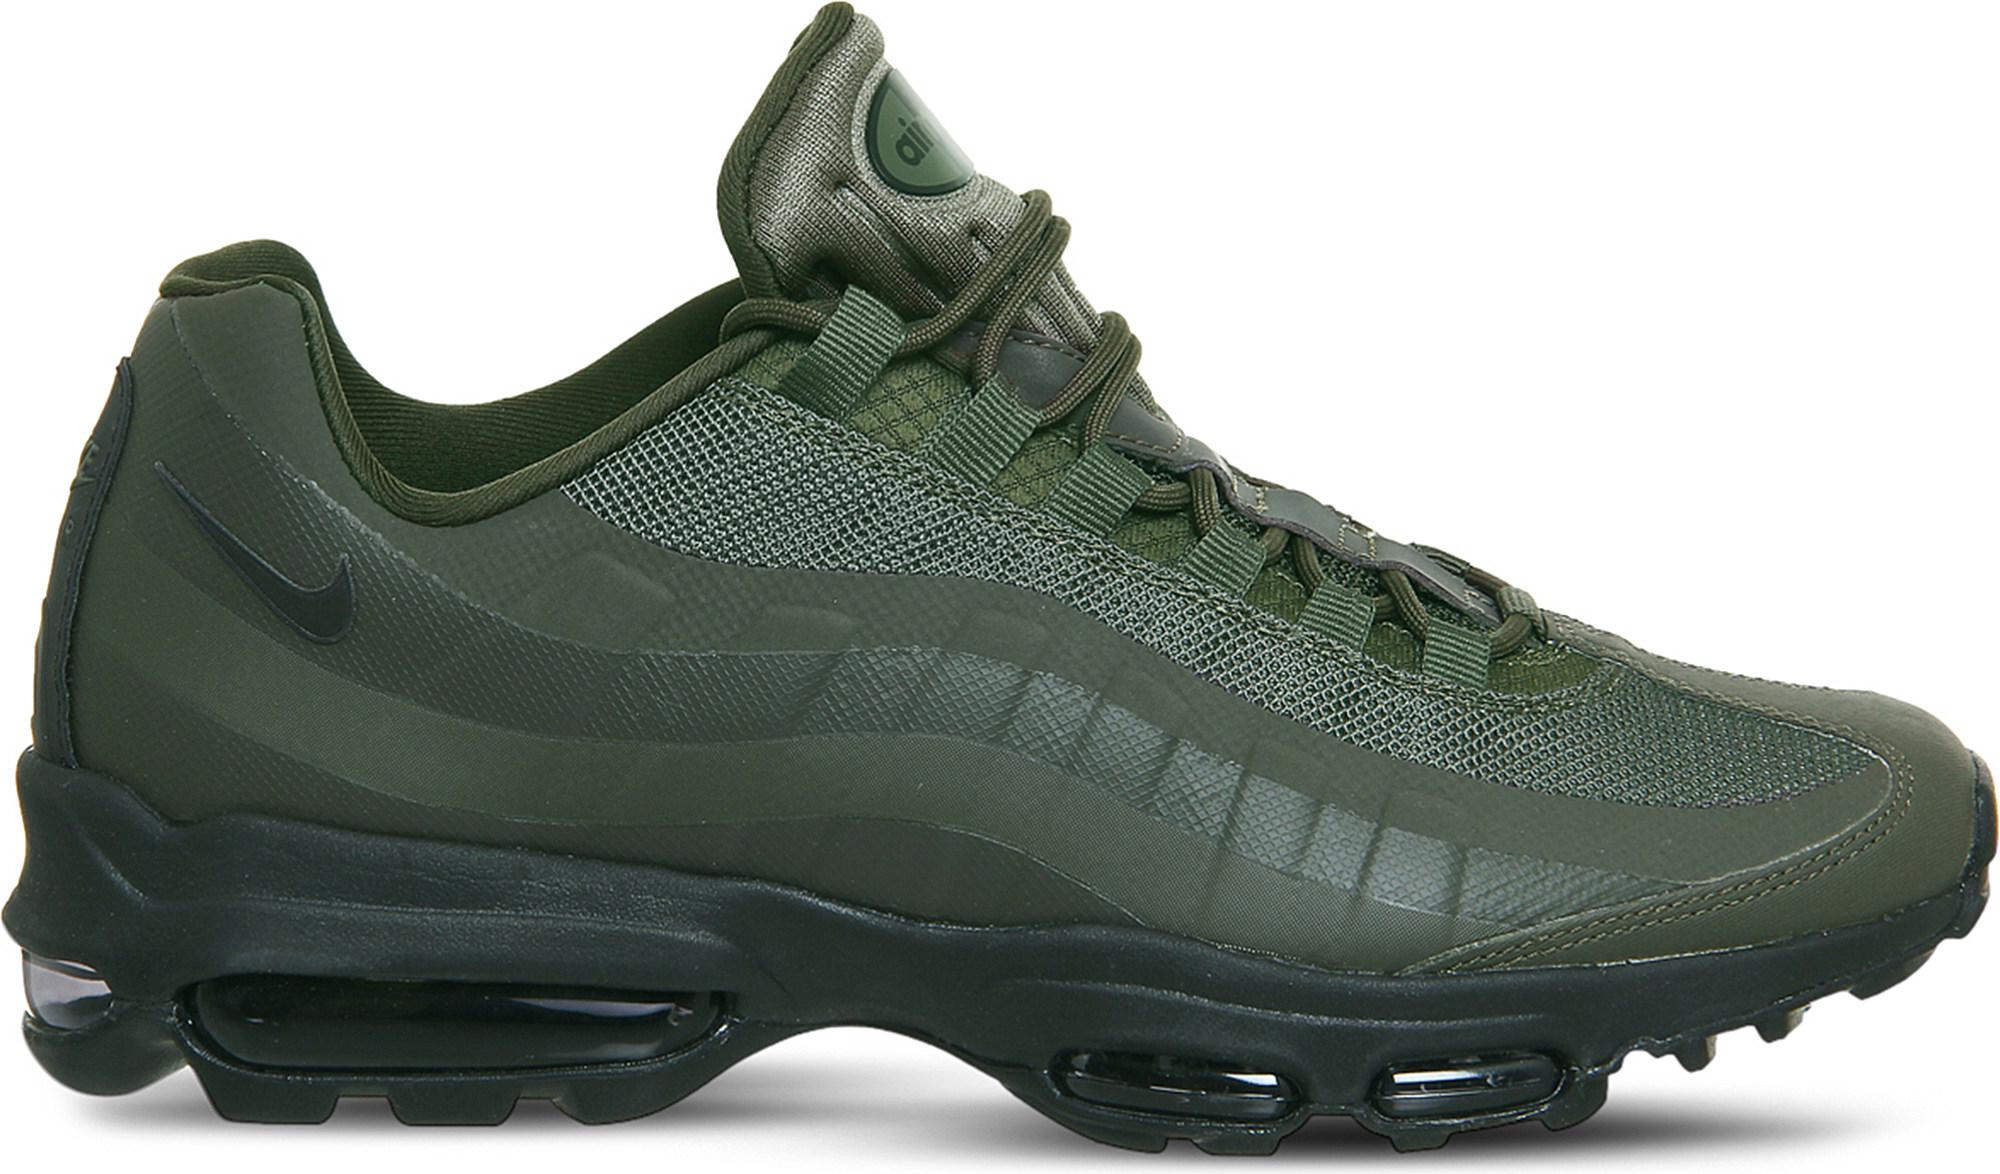 Lyst - Nike Air Max 95 Ultra Leather And Mesh Trainers in Green for Men